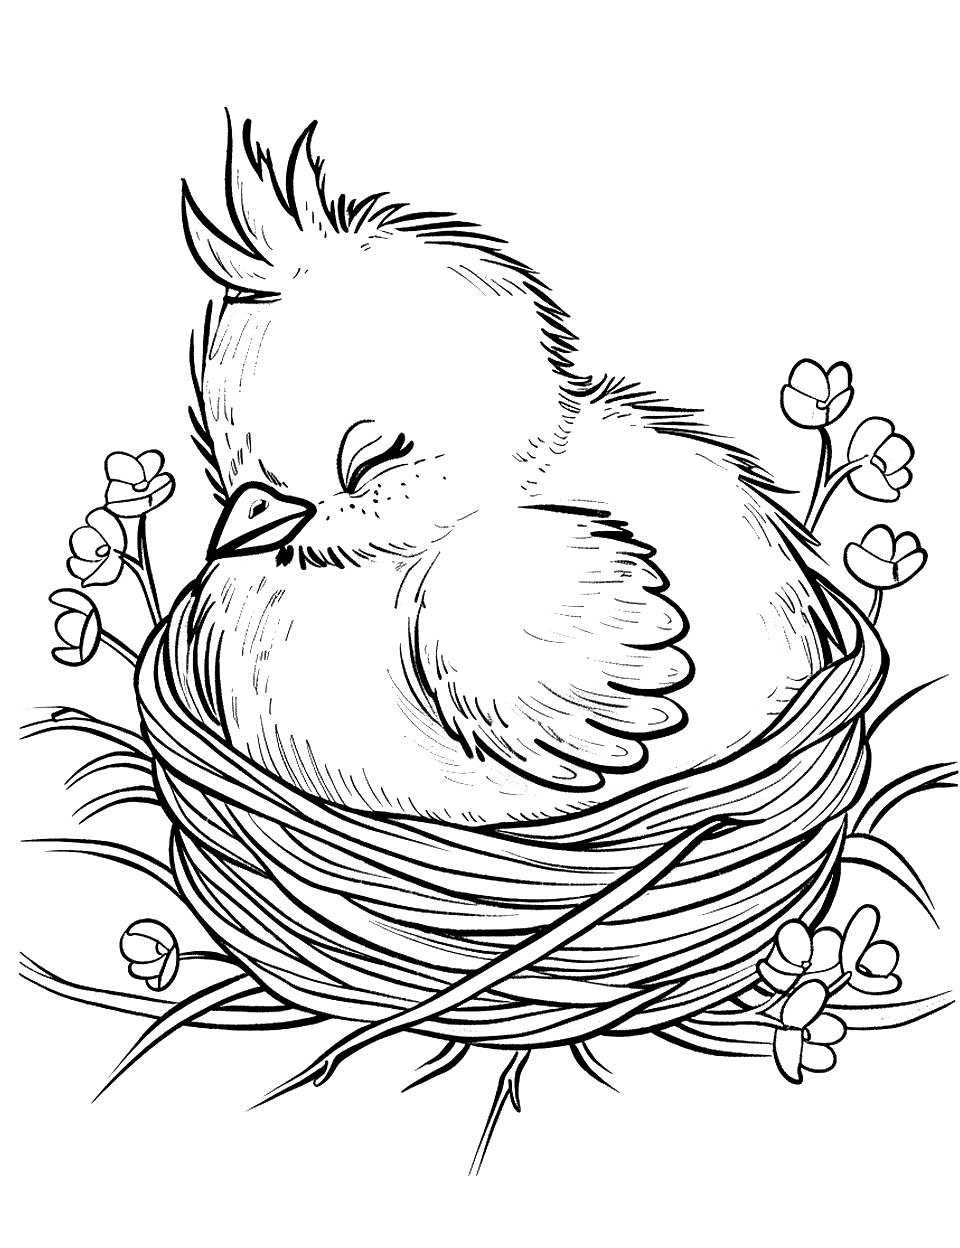 Sleepy Chick in a Nest Chicken Coloring Page - A peaceful scene with a sleepy chick cuddled up in a nest made of straw.